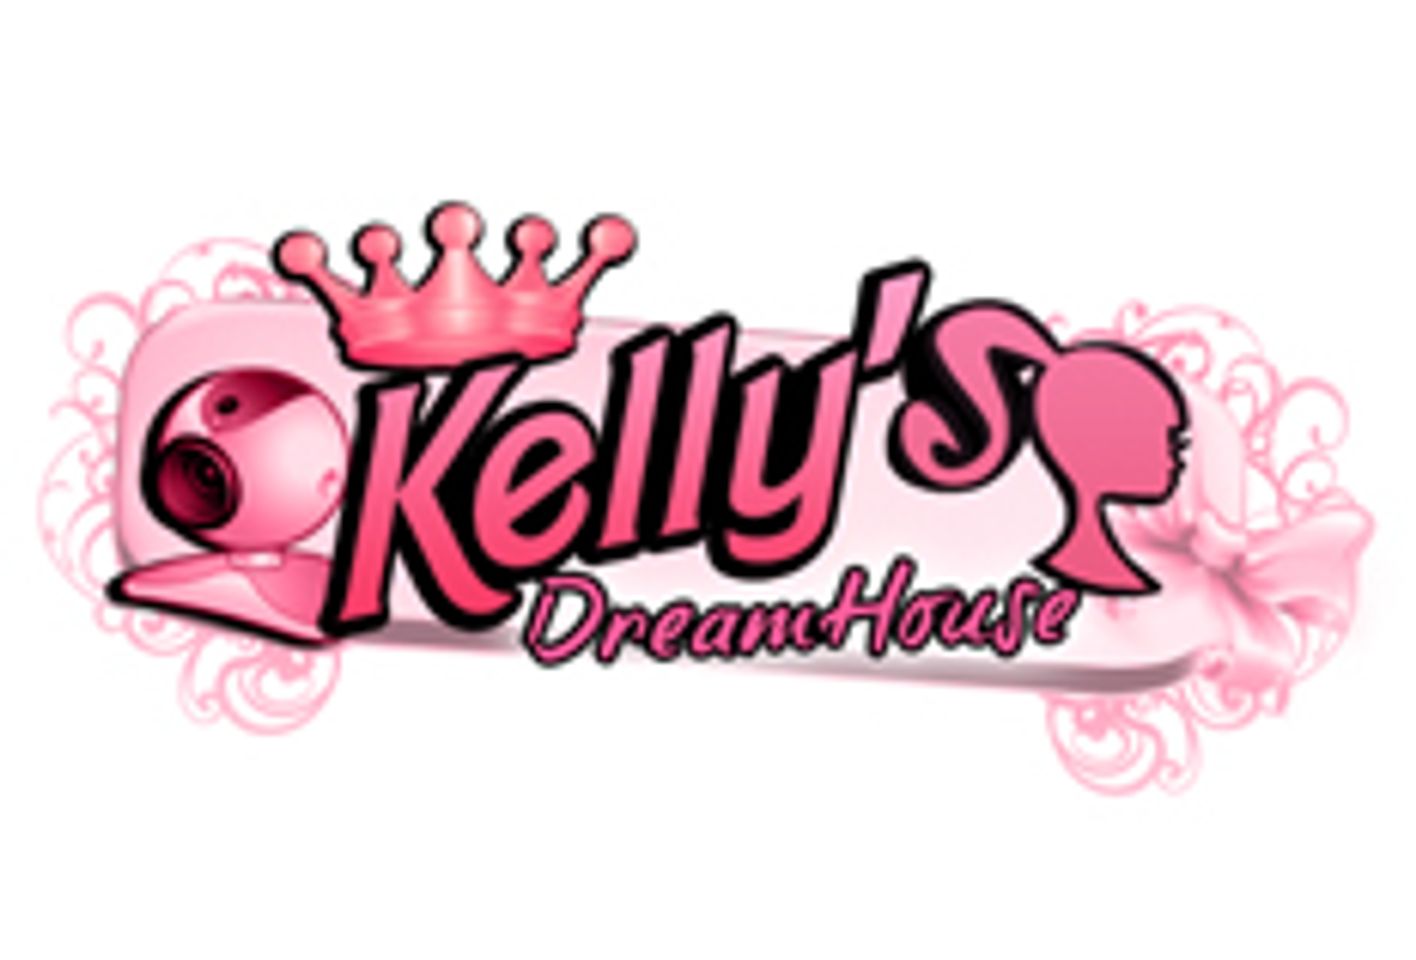 KellysDreamhouse.com Adds Two New TS Starlets